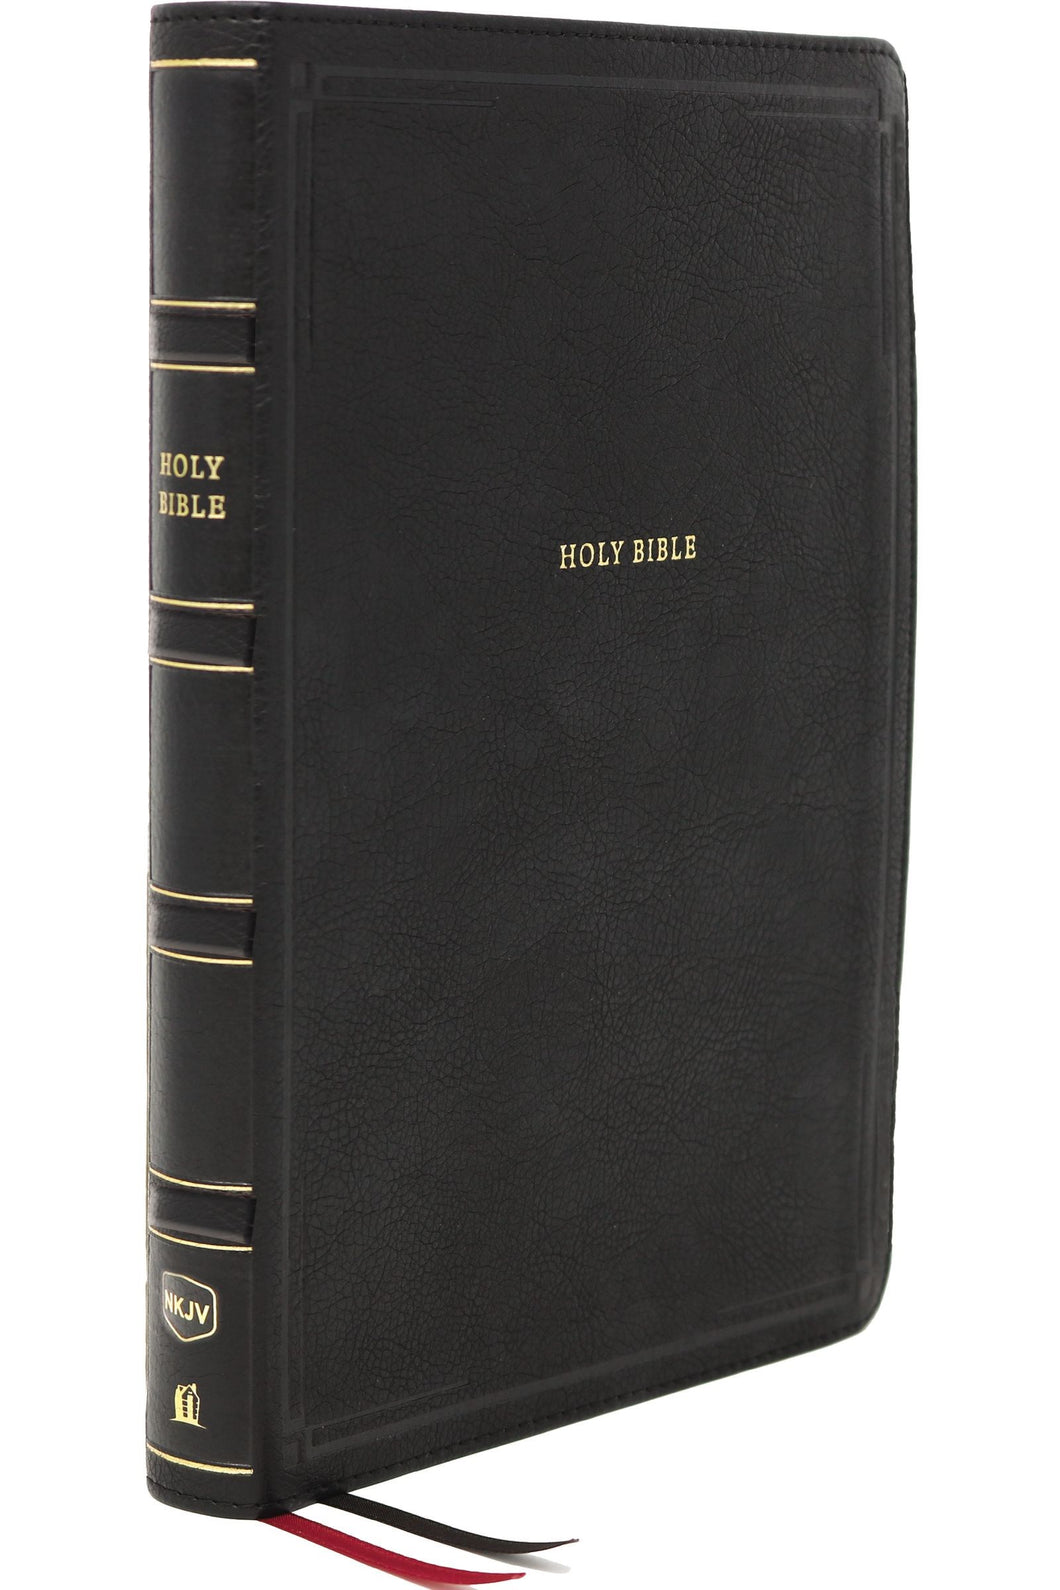 NKJV Large Print Personal Size End-Of-Verse Reference Bible-Black LeatherSoft Indexed